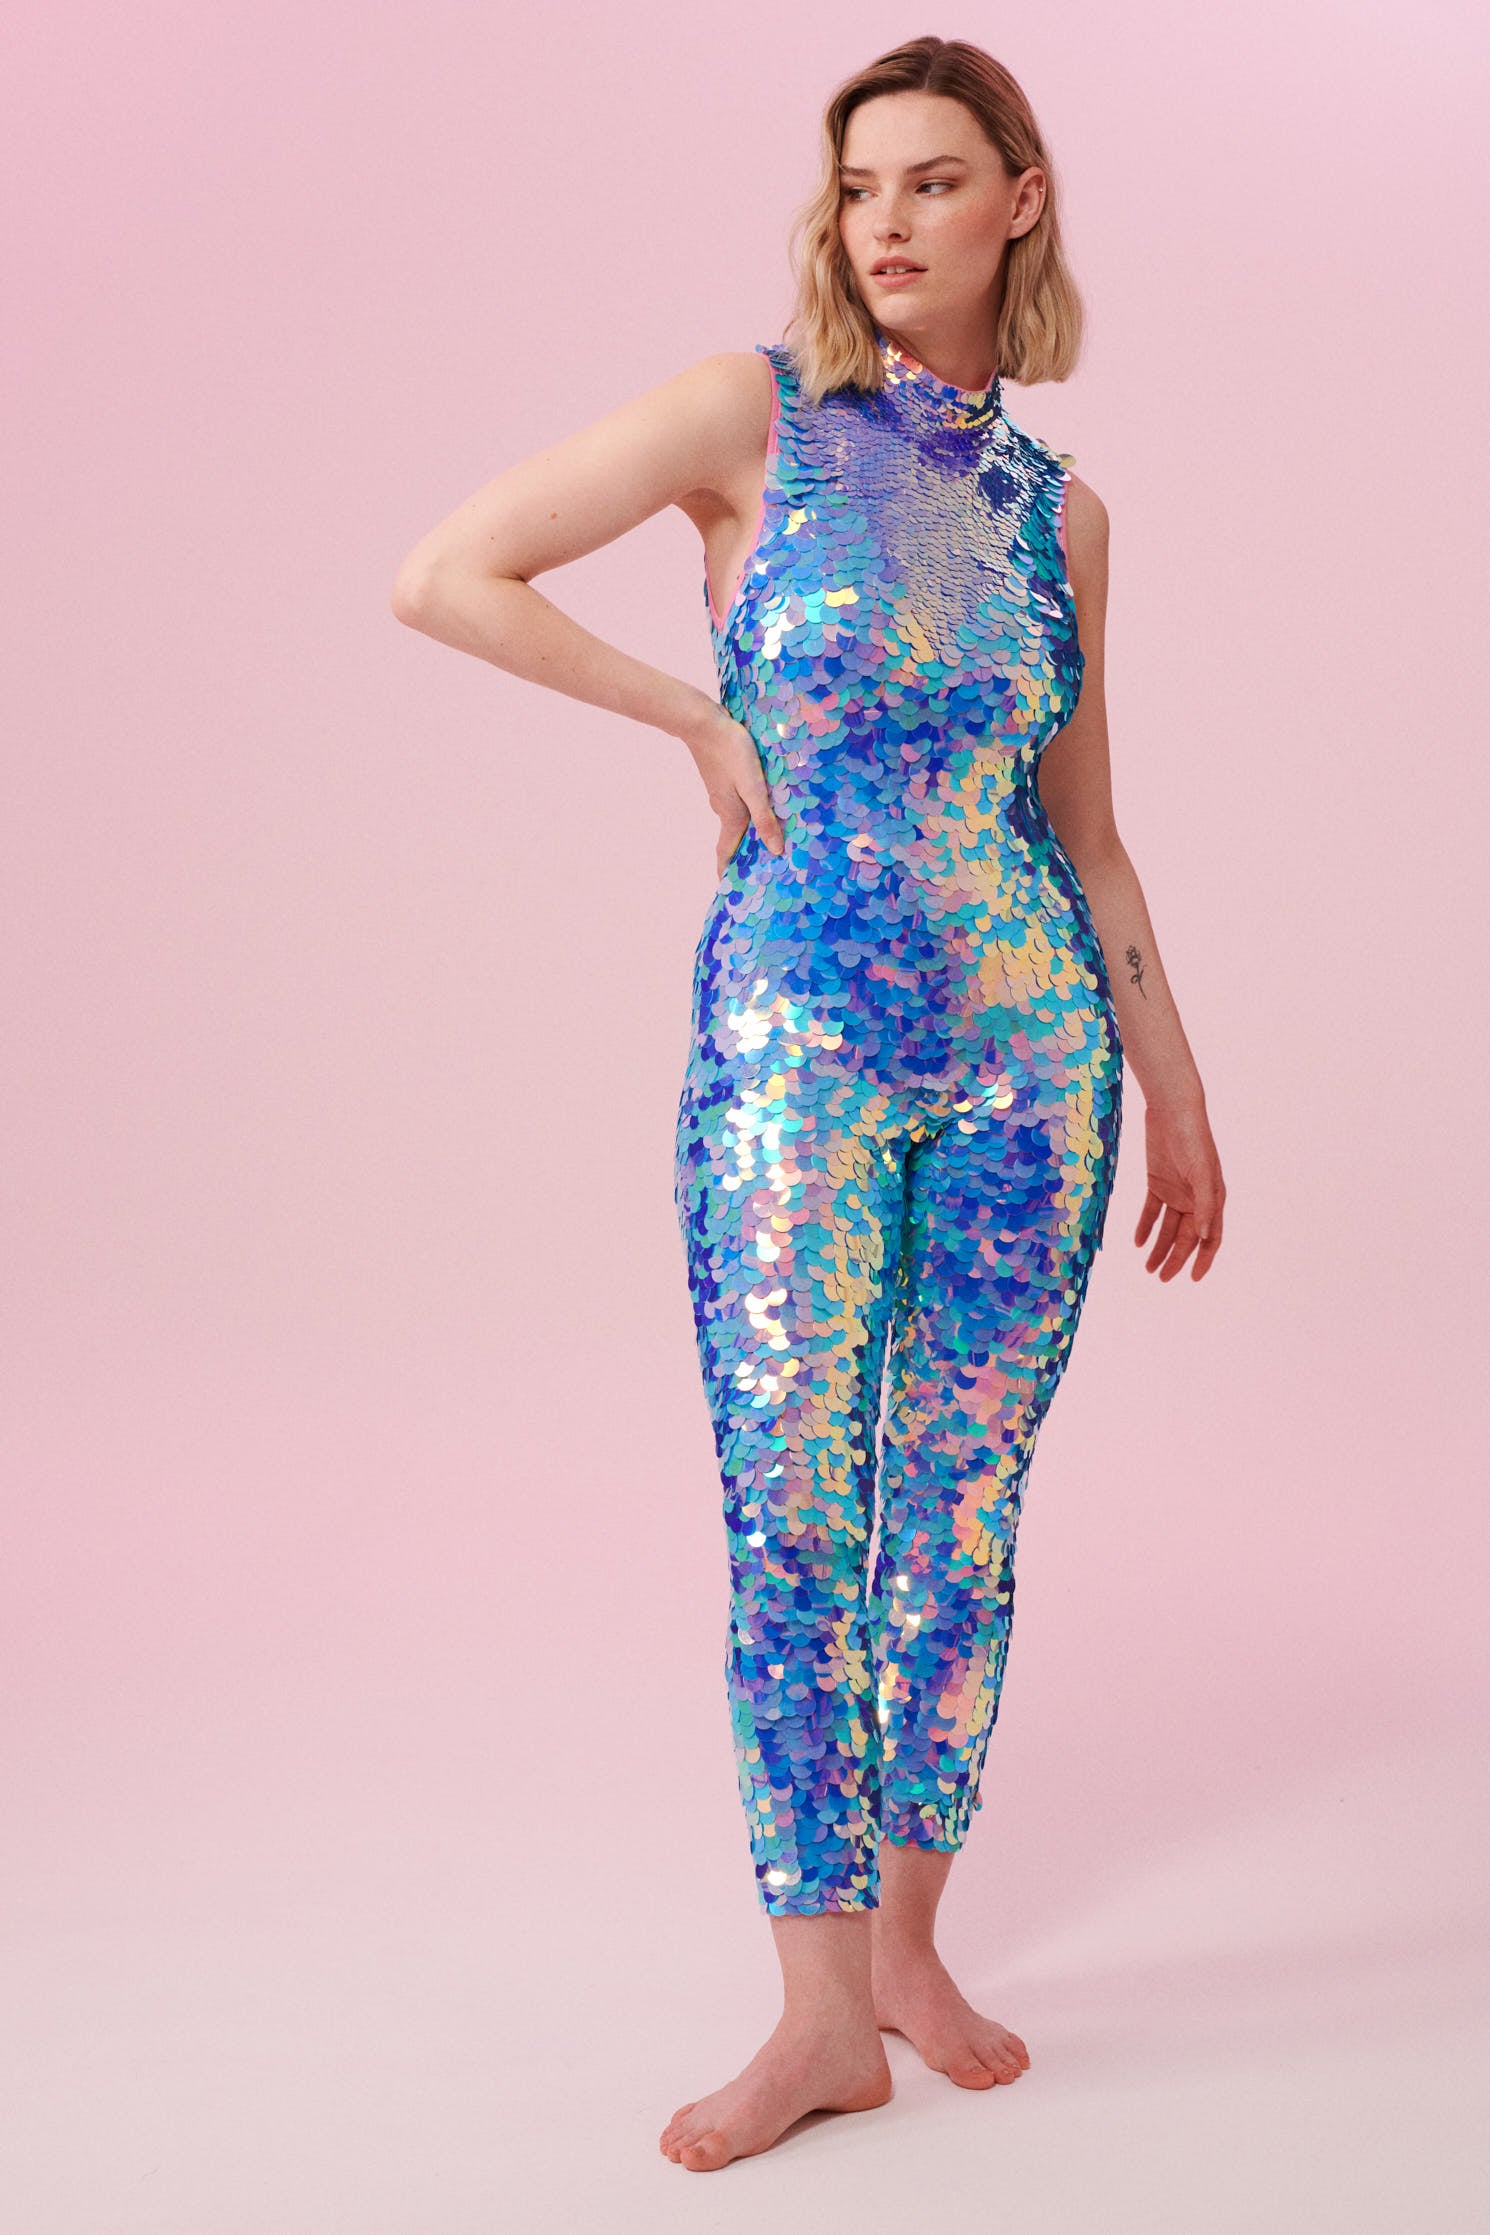  A woman with short blonde hair, wearing an all-in-one sequin stretchy festival jumpsuit made with large round holographic Rosa Bloom sequins. The Iris sequins glisten, creating a mix of shimmering colours of pink, blue and purple.  